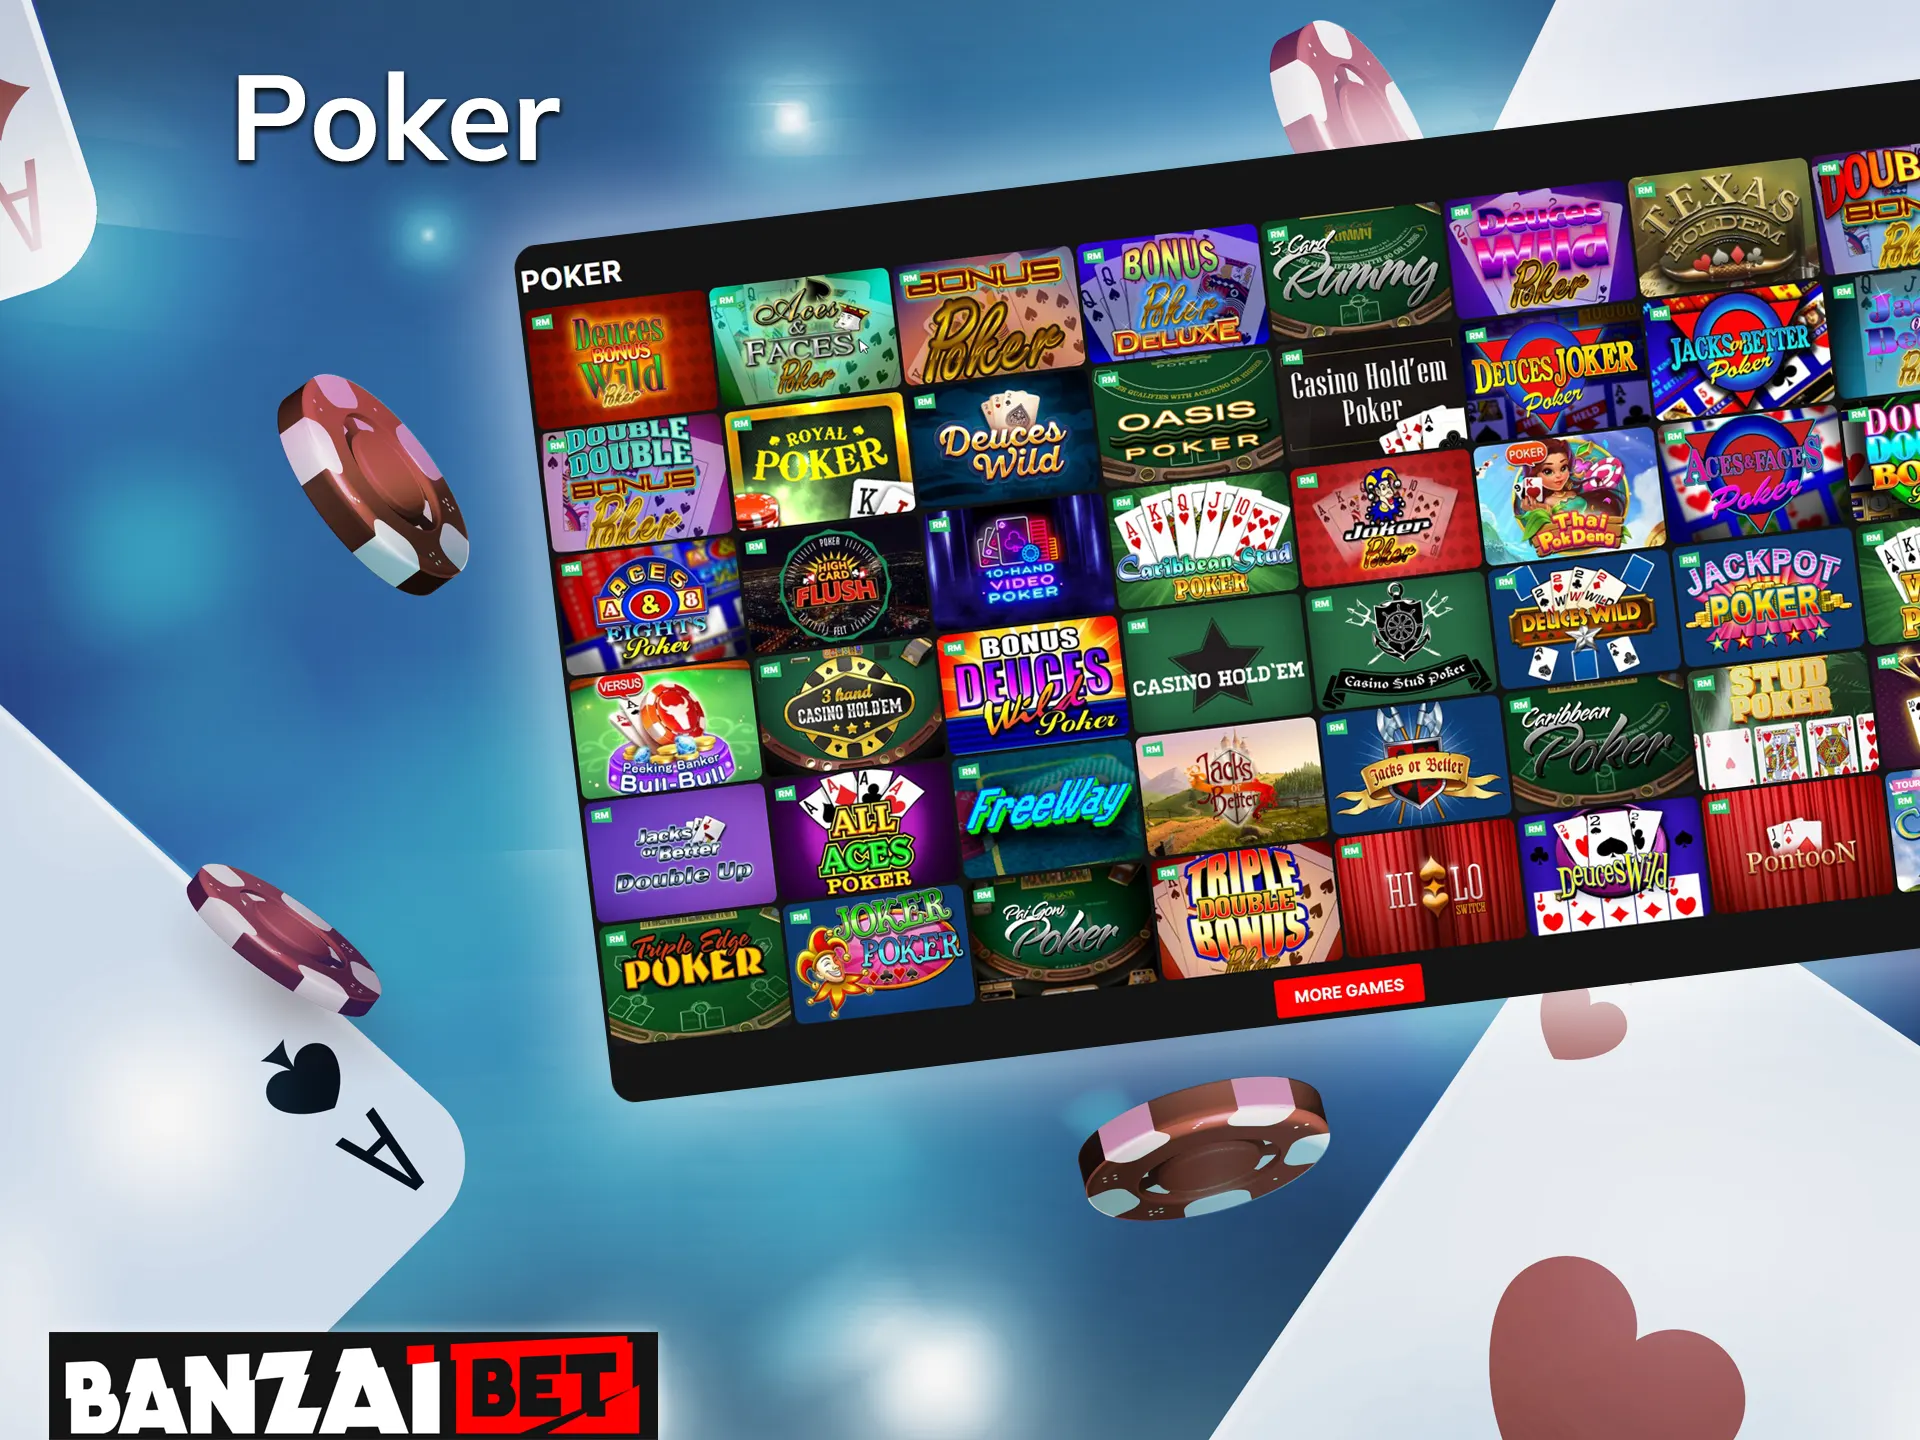 At the Banzai Bet online casino site you can play Poker.